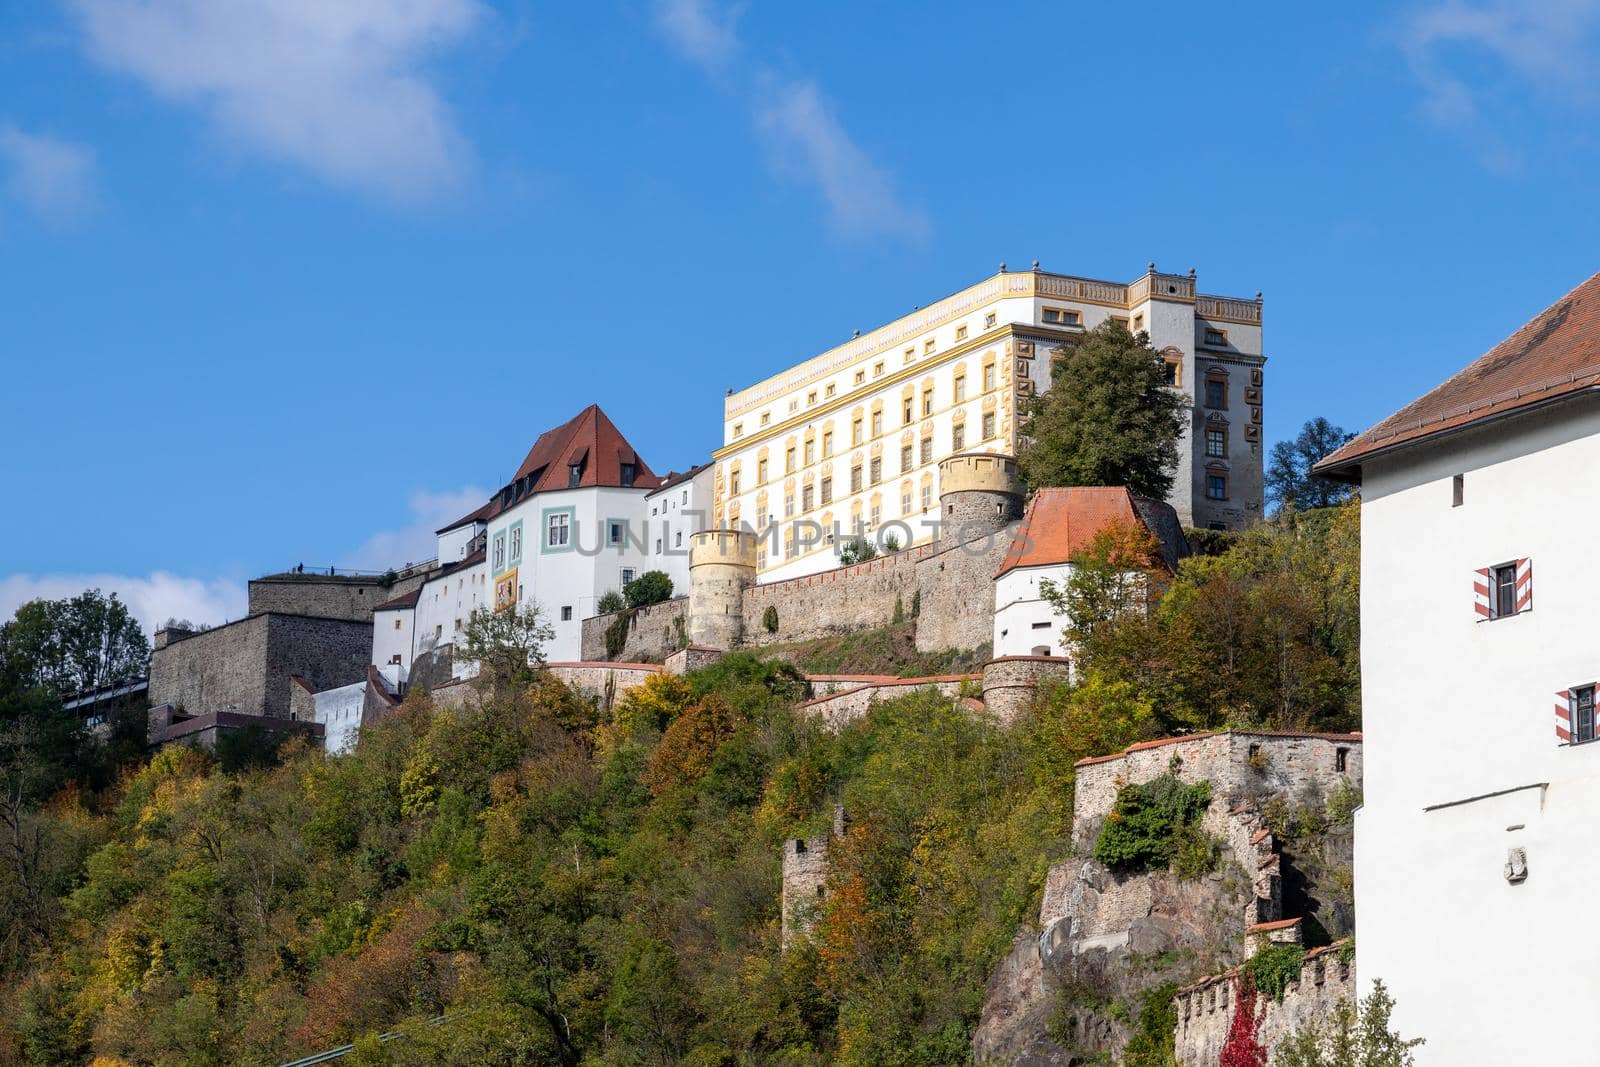 View at fortress Veste Oberhaus in Passau during a ship excursion in autumn with colorfull trees